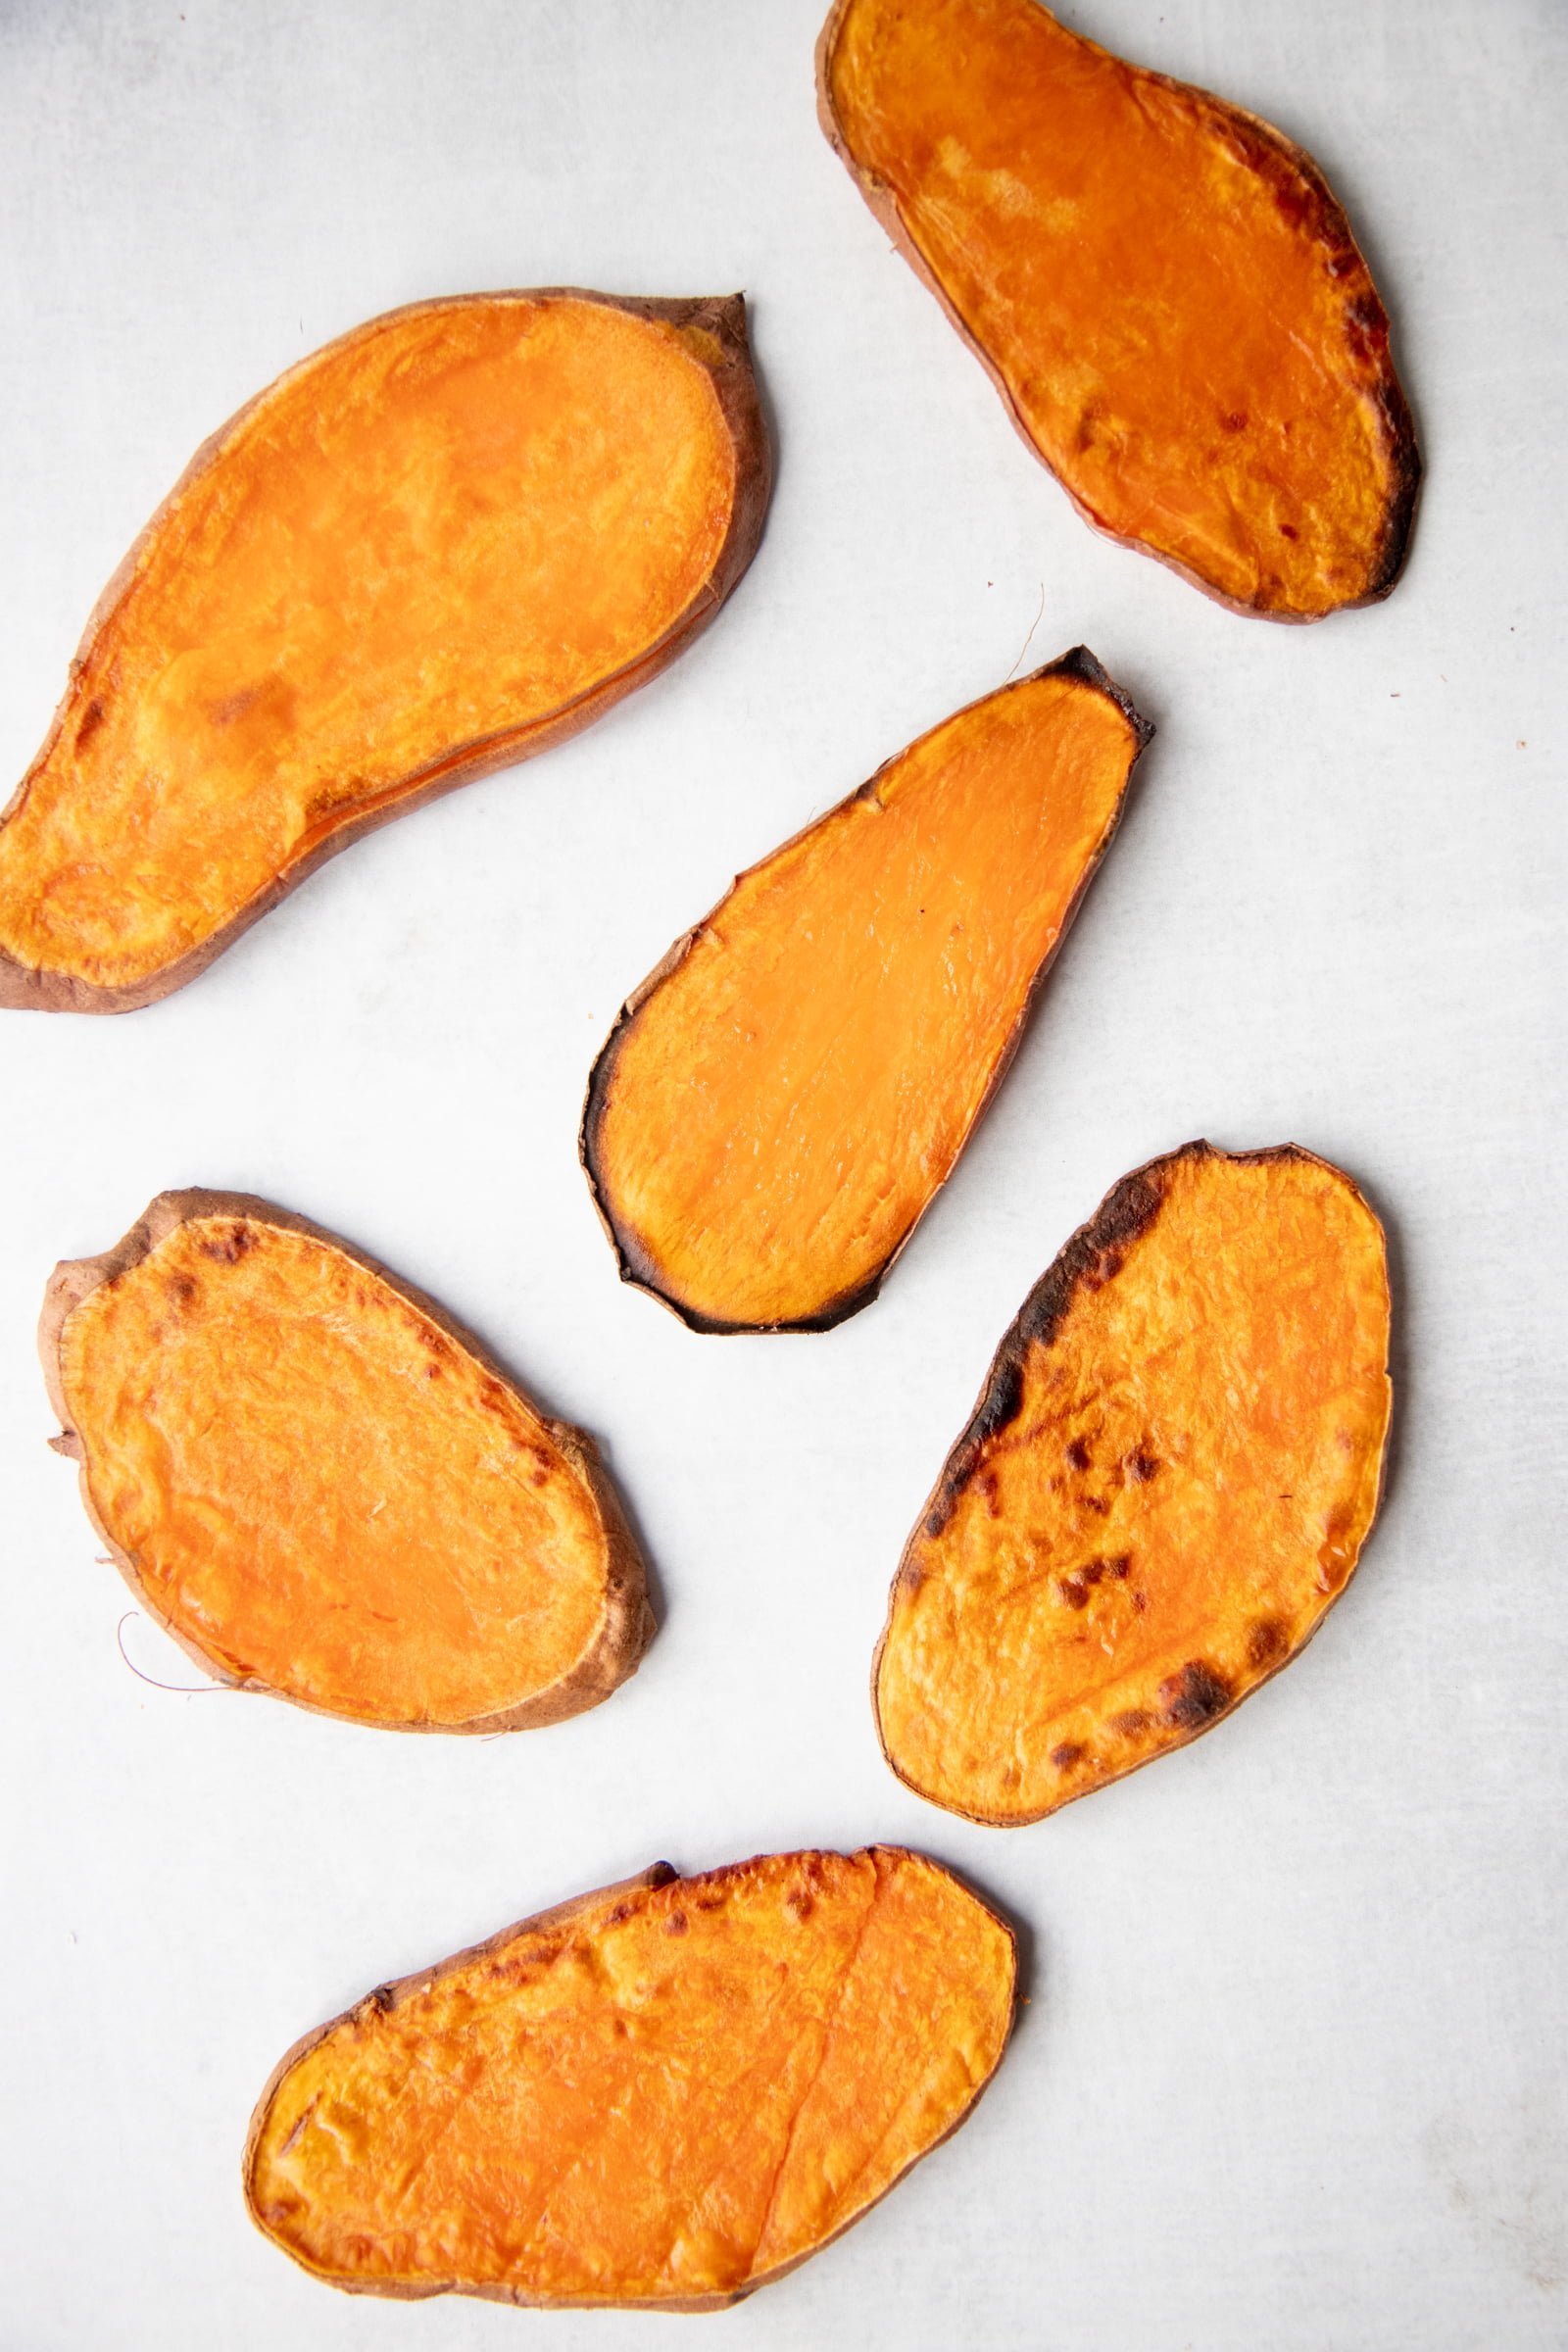 Sweet potato planks toasted and laid out on a white background